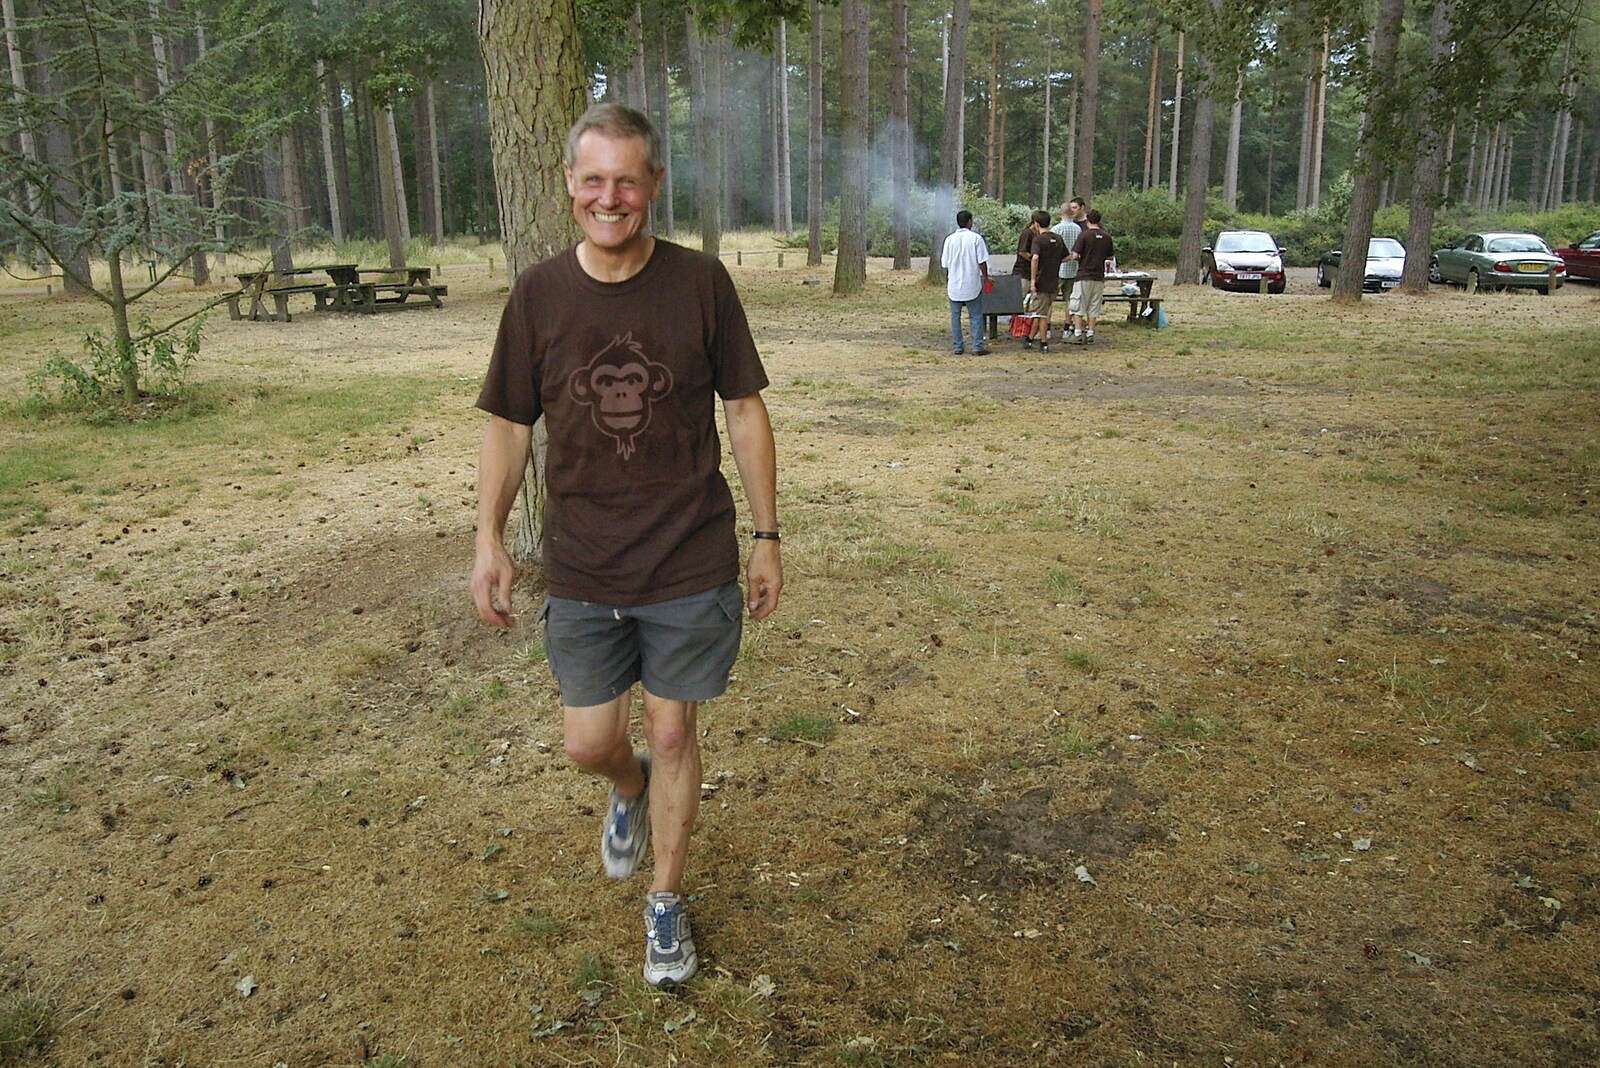 Tim roams about from Qualcomm Cambridge "Go Ape", High Lodge, Thetford Forest - 27th July 2006